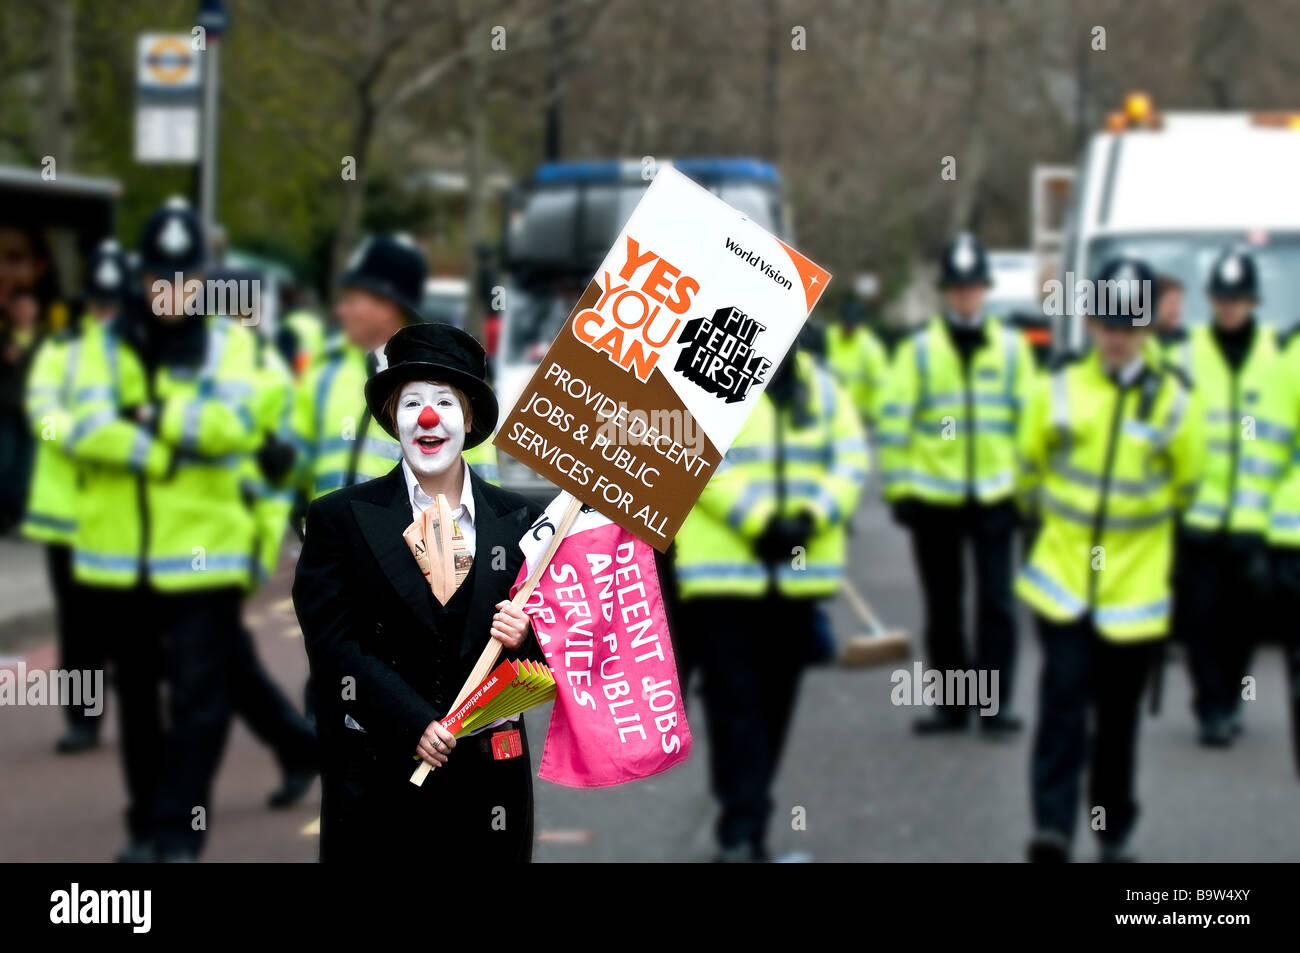 A demonstrator at a demonstration in London Stock Photo